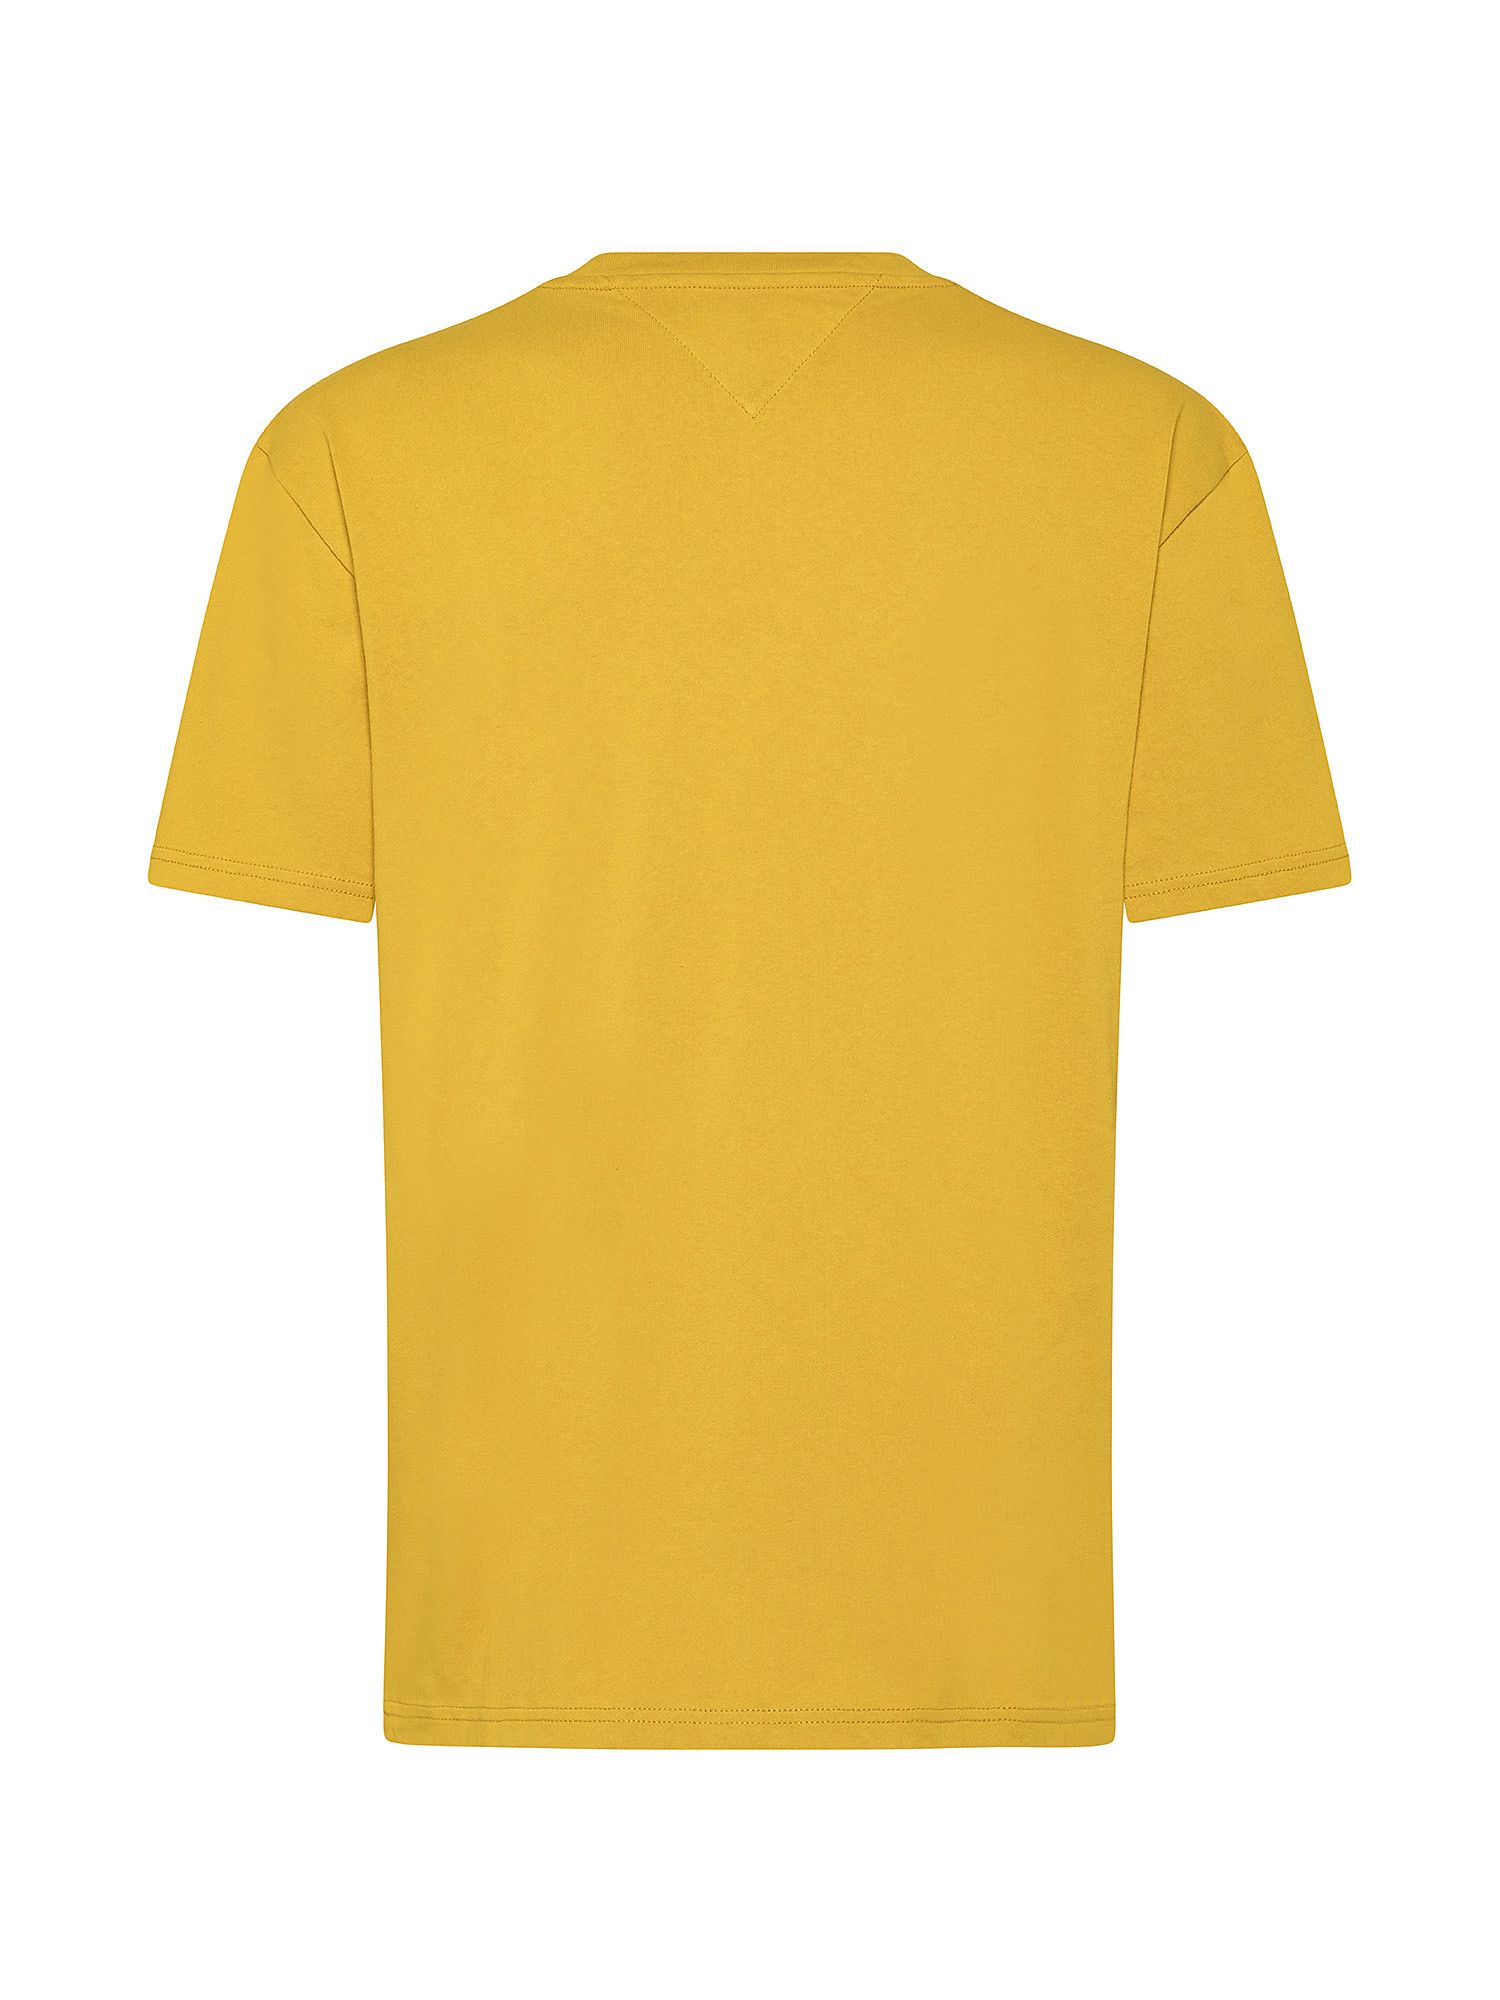 Tommy Jeans - T-shirt girocollo con logo, Giallo, large image number 1